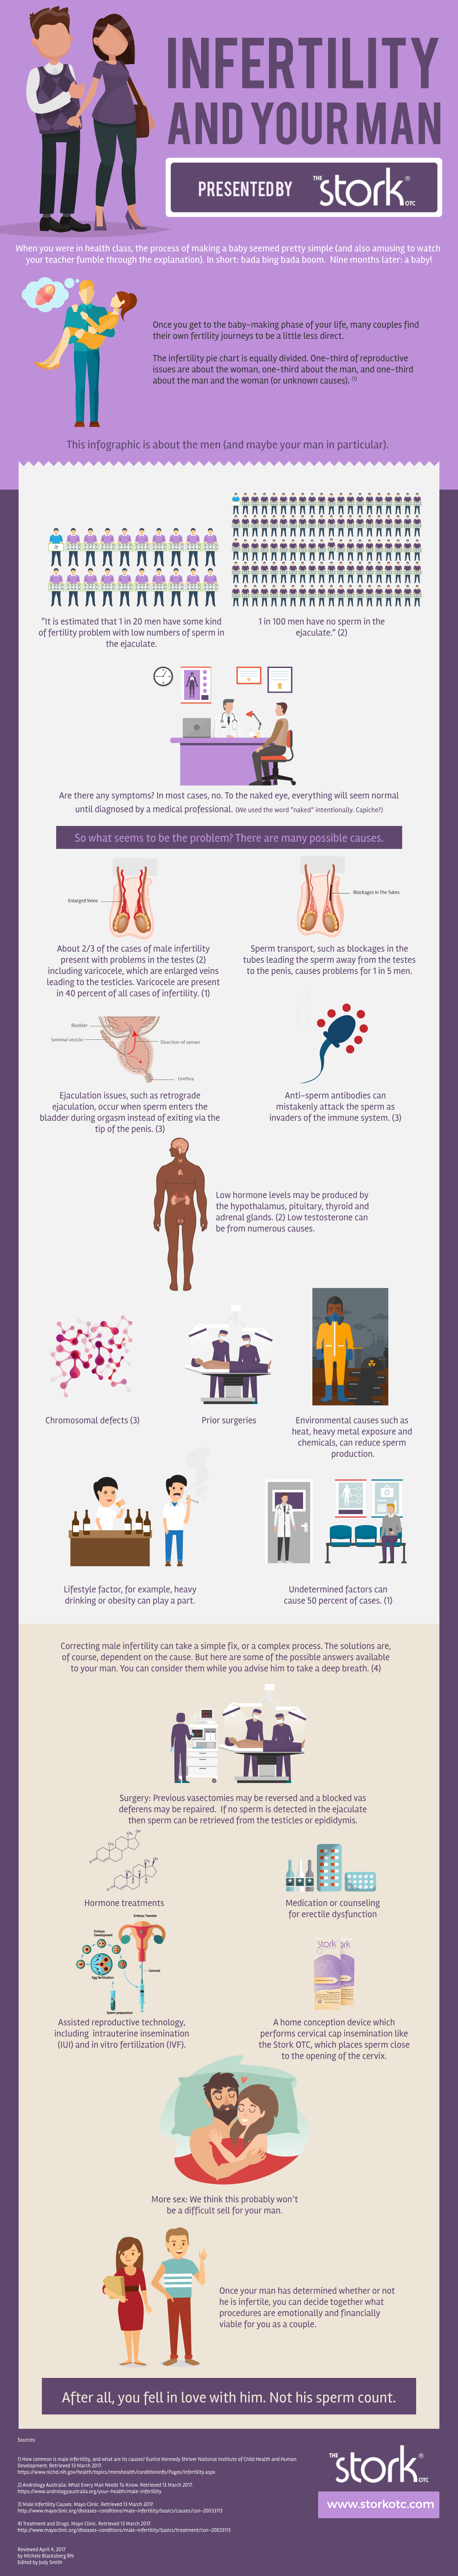 Infographic infertility and your man